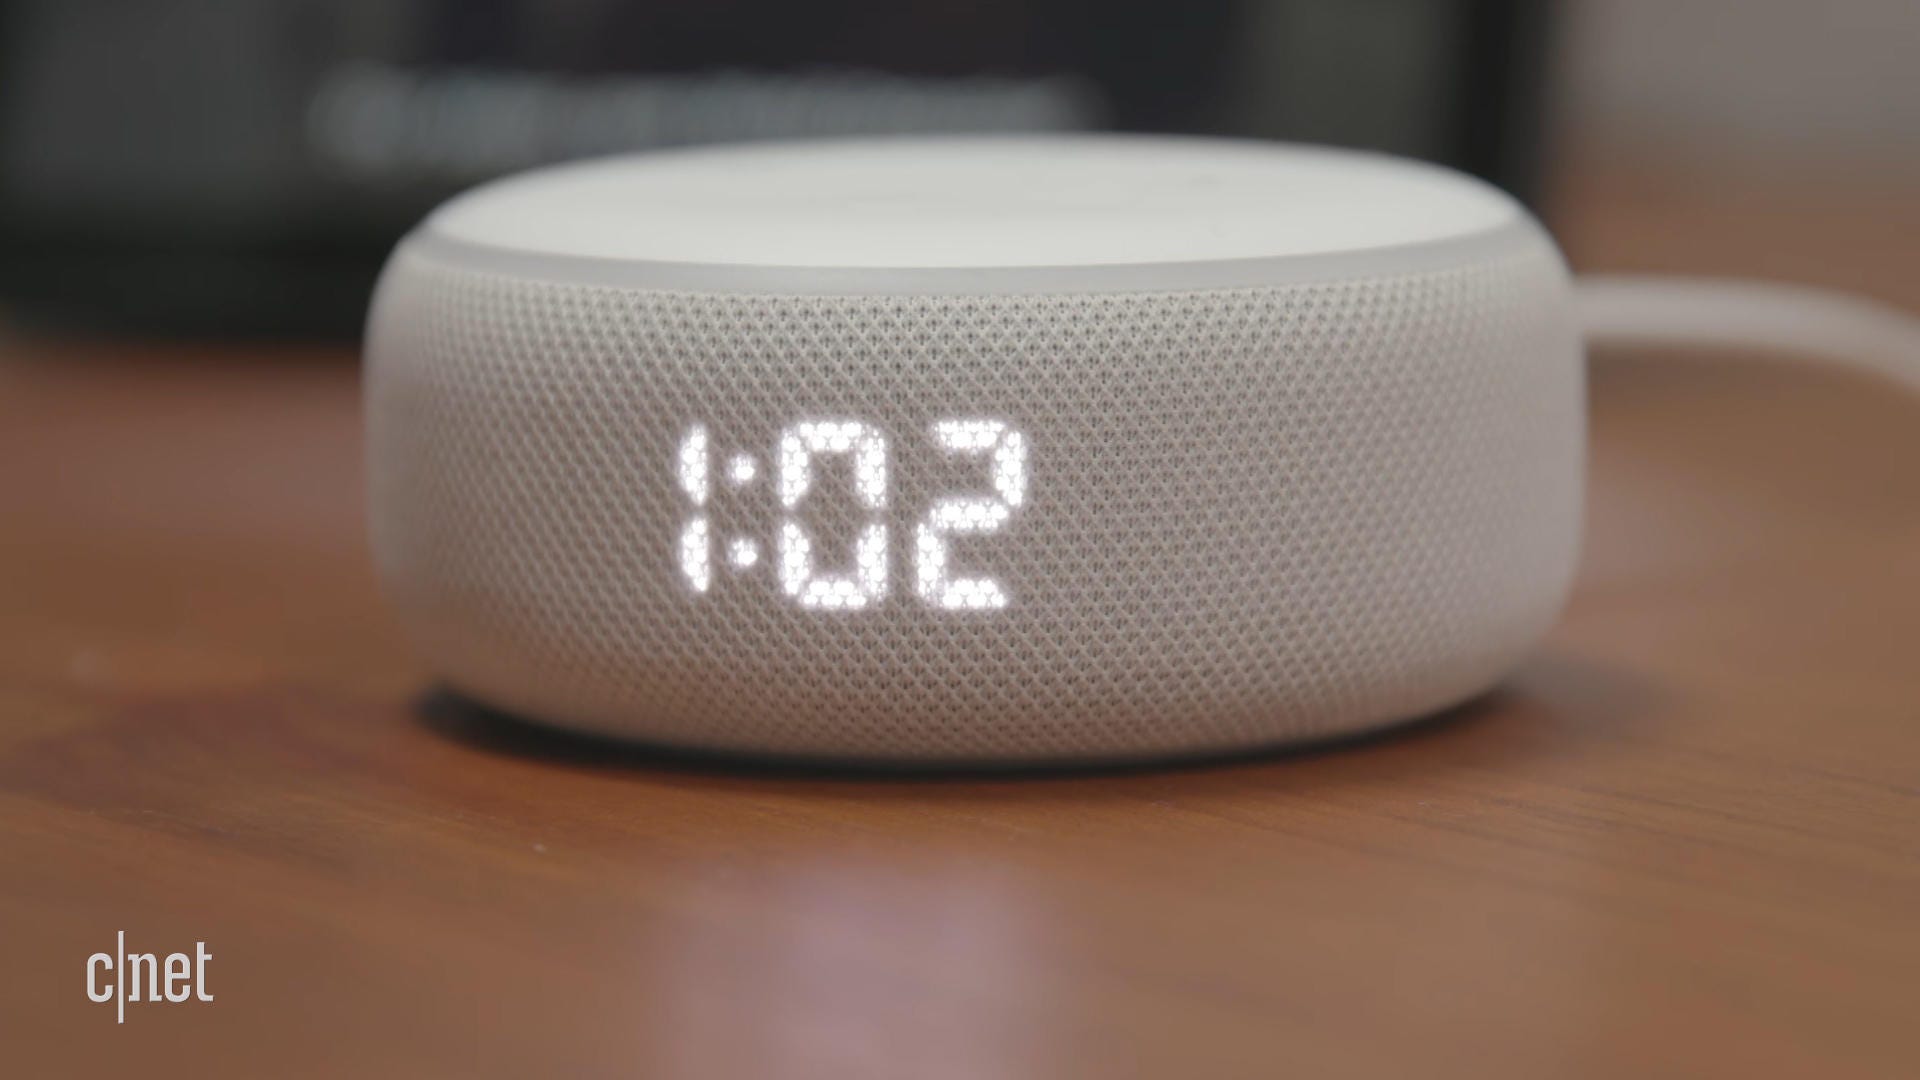 Hands-On With 's New Echo Dot Speakers: Should You Upgrade? - CNET